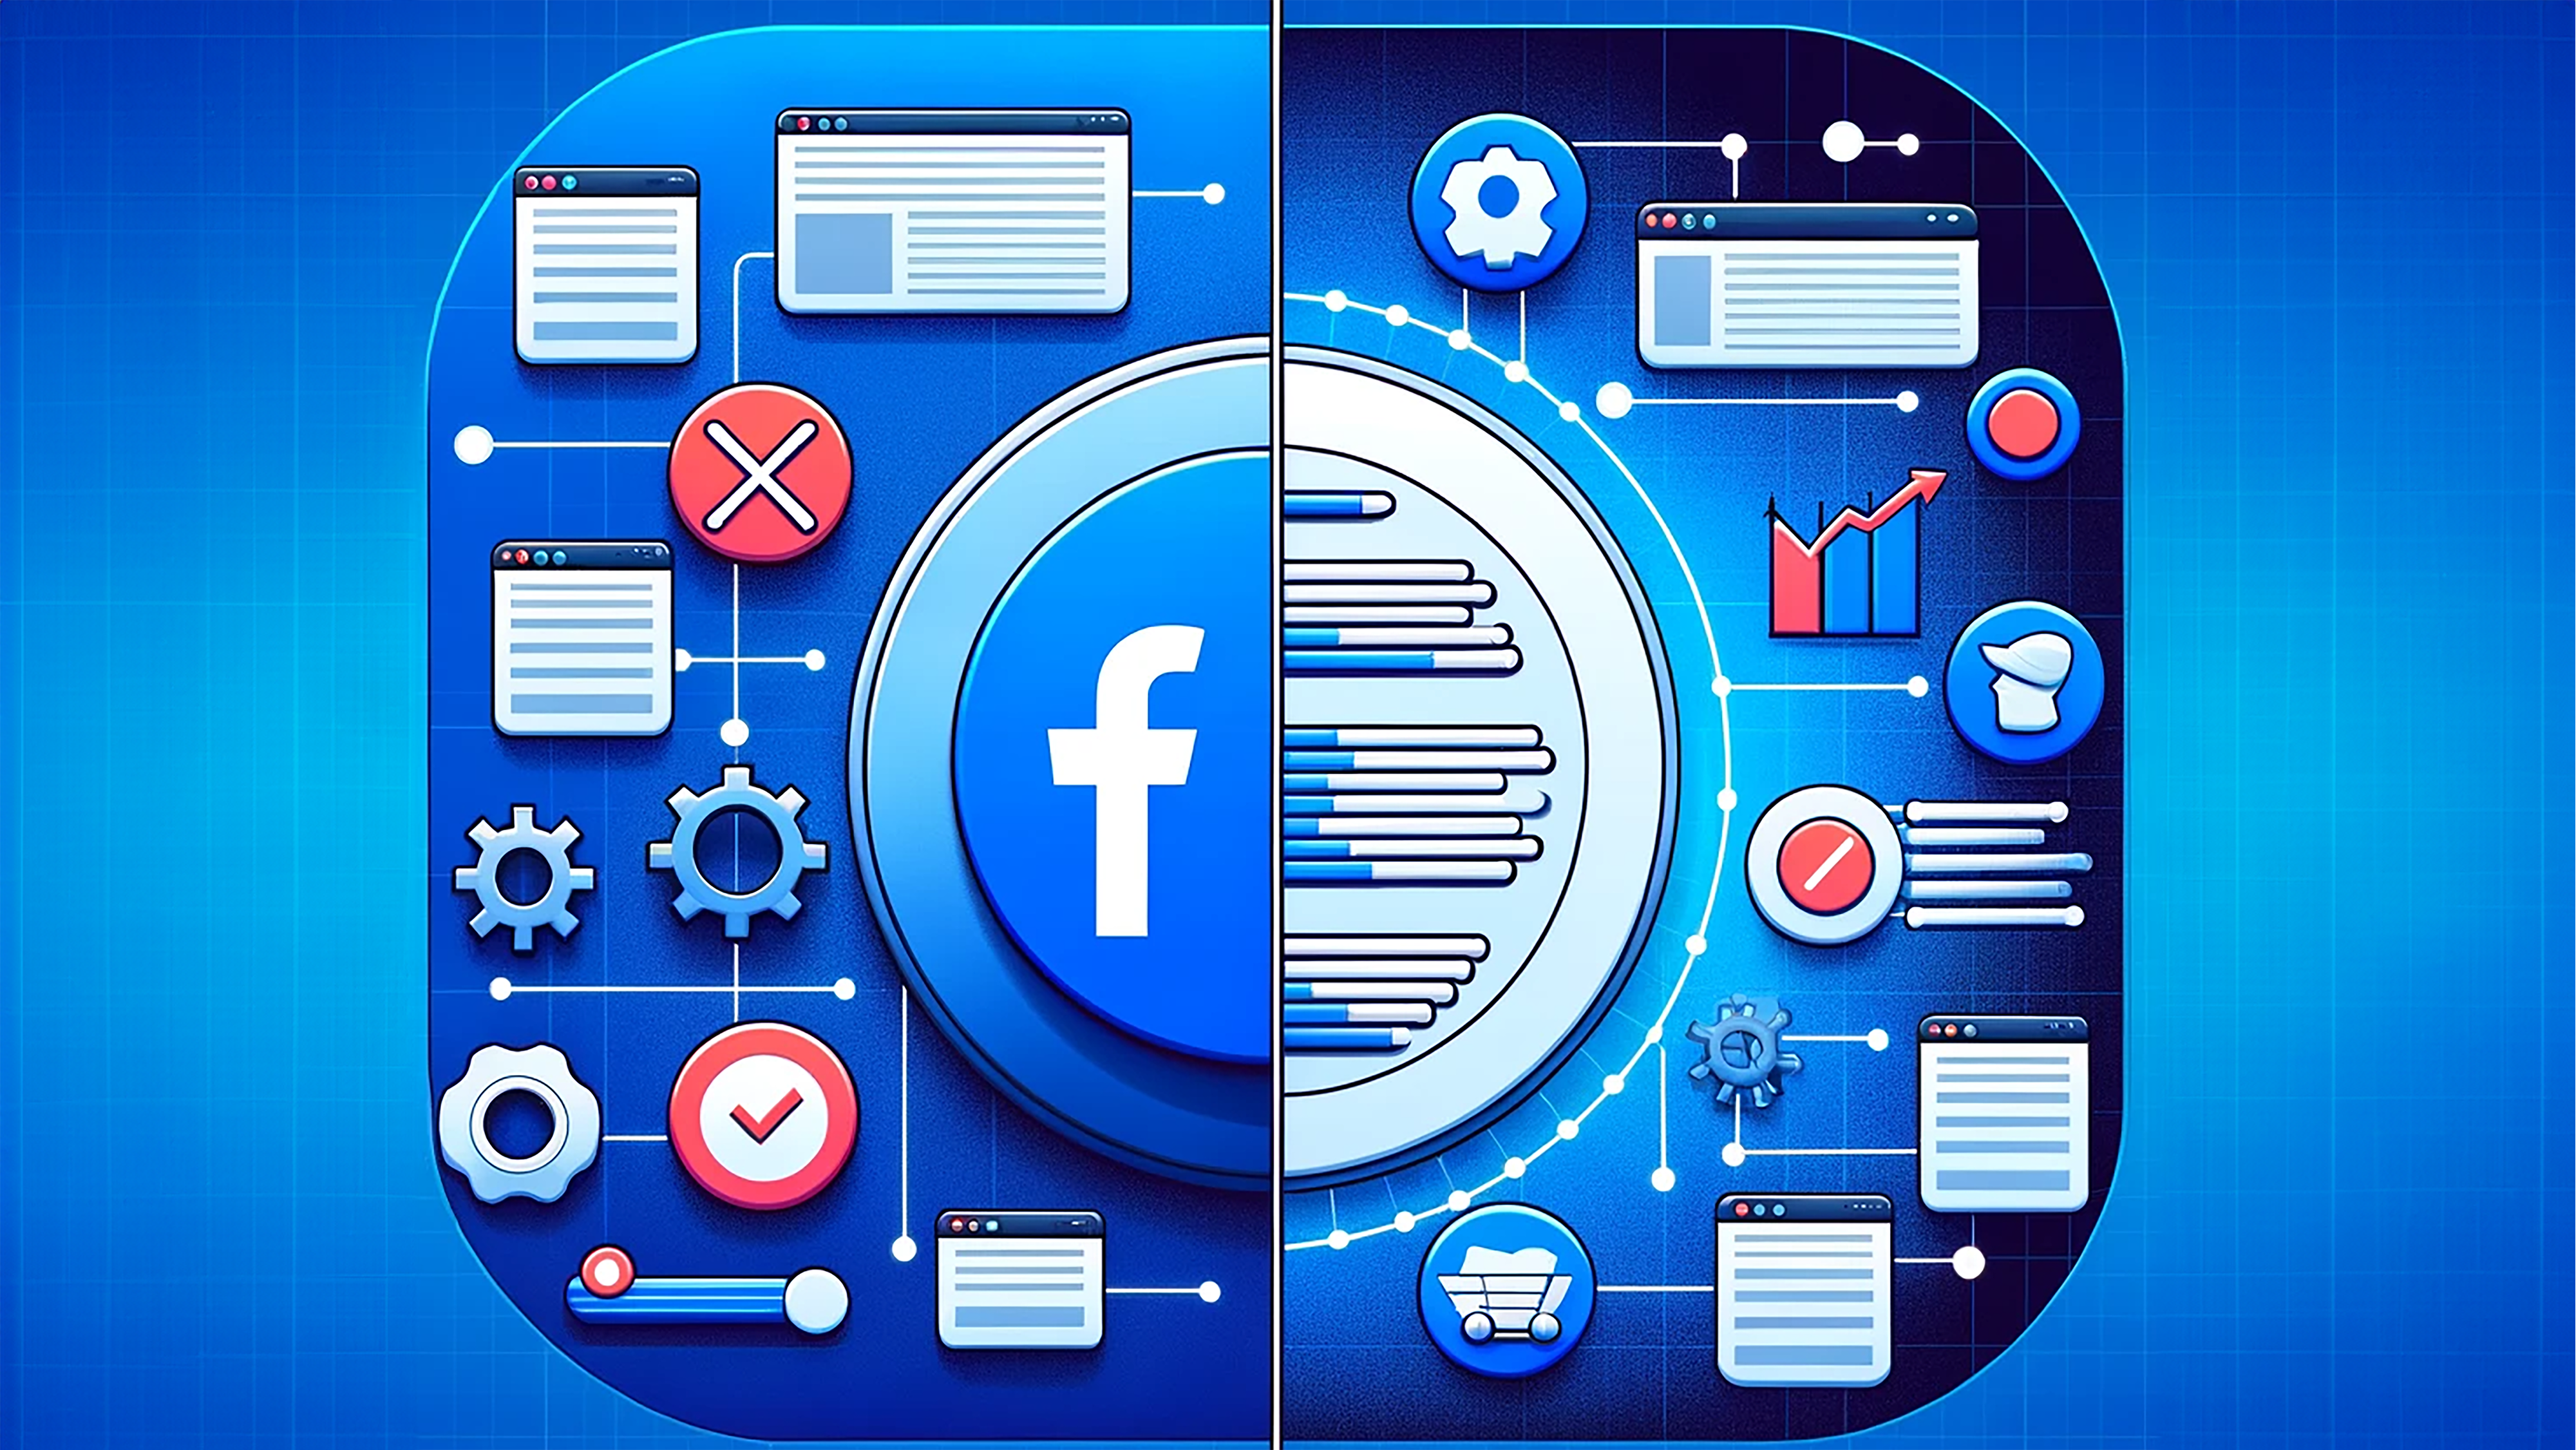 Beyond Browser Limits: Maximizing Data Integrity with Facebook’s Server-Side Conversion Tracking